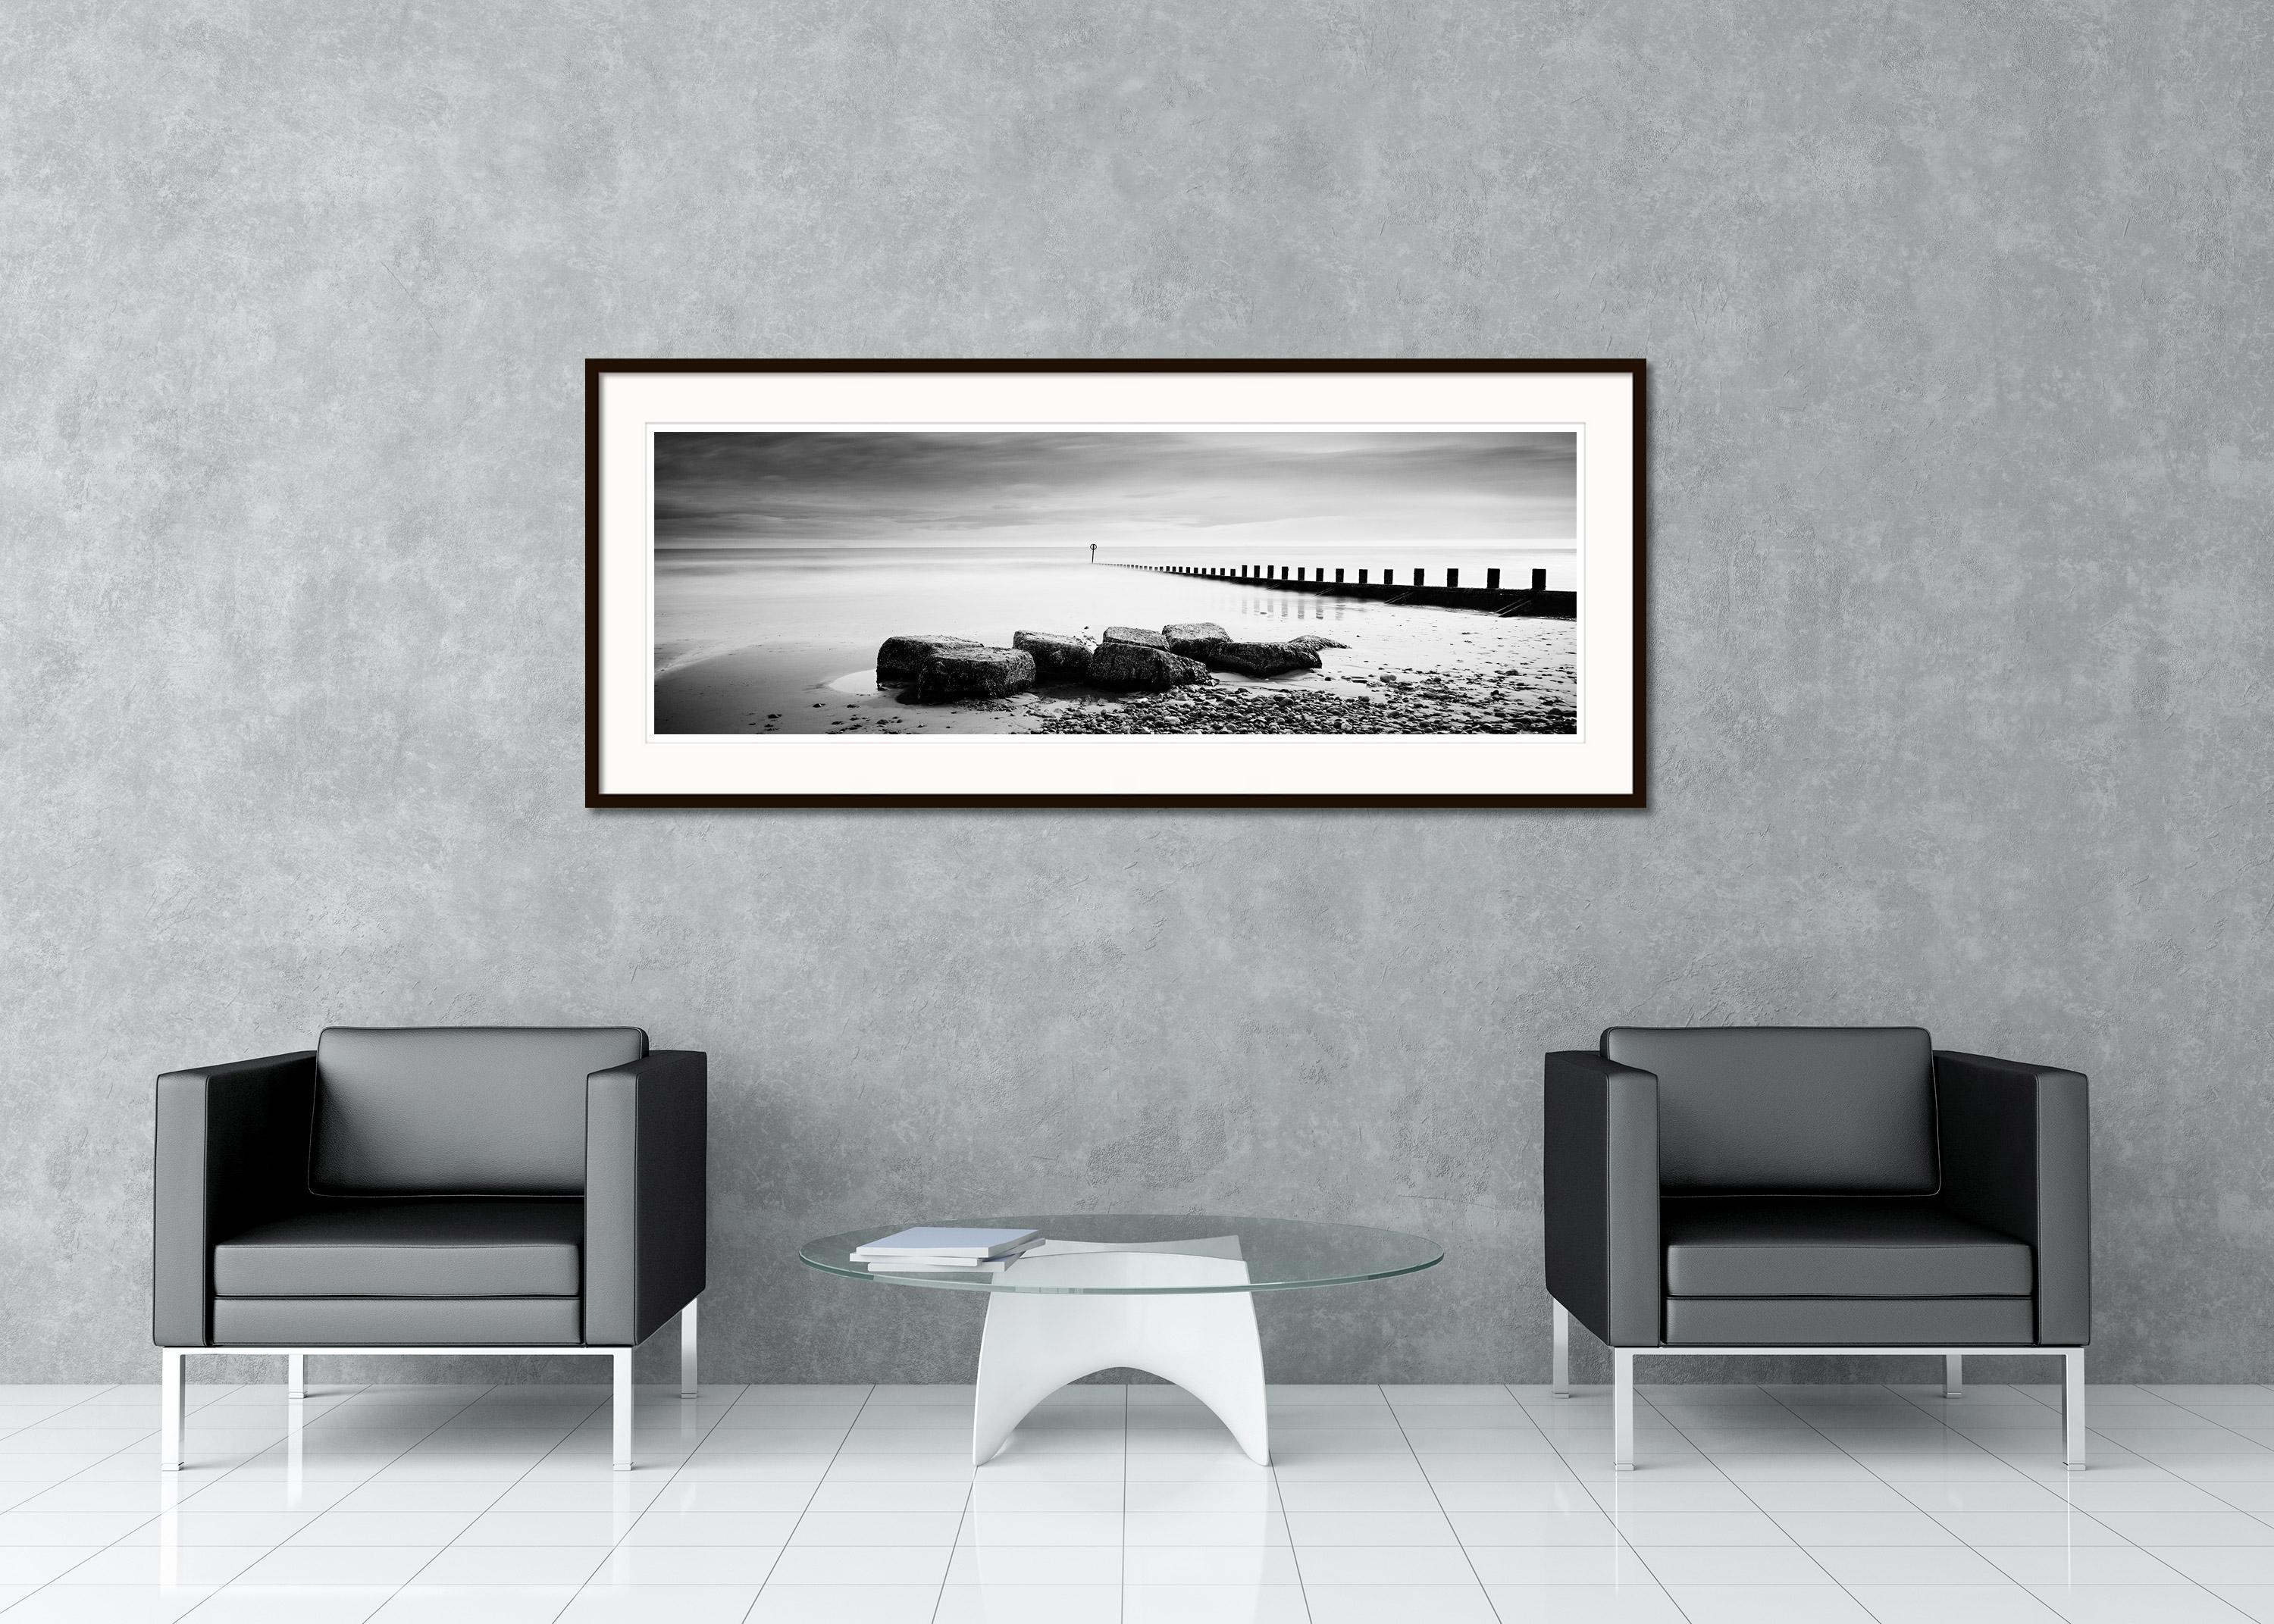 Gerald Berghammer - Limited edition of 9
Archival fine art pigment print. Signed, titled, dated and numbered by artist. Certificate of authenticity included. Printed with 4cm white border.
15.75 x 47.24 in. (40 x 120 cm) edition of 9
19.69 x 59.06